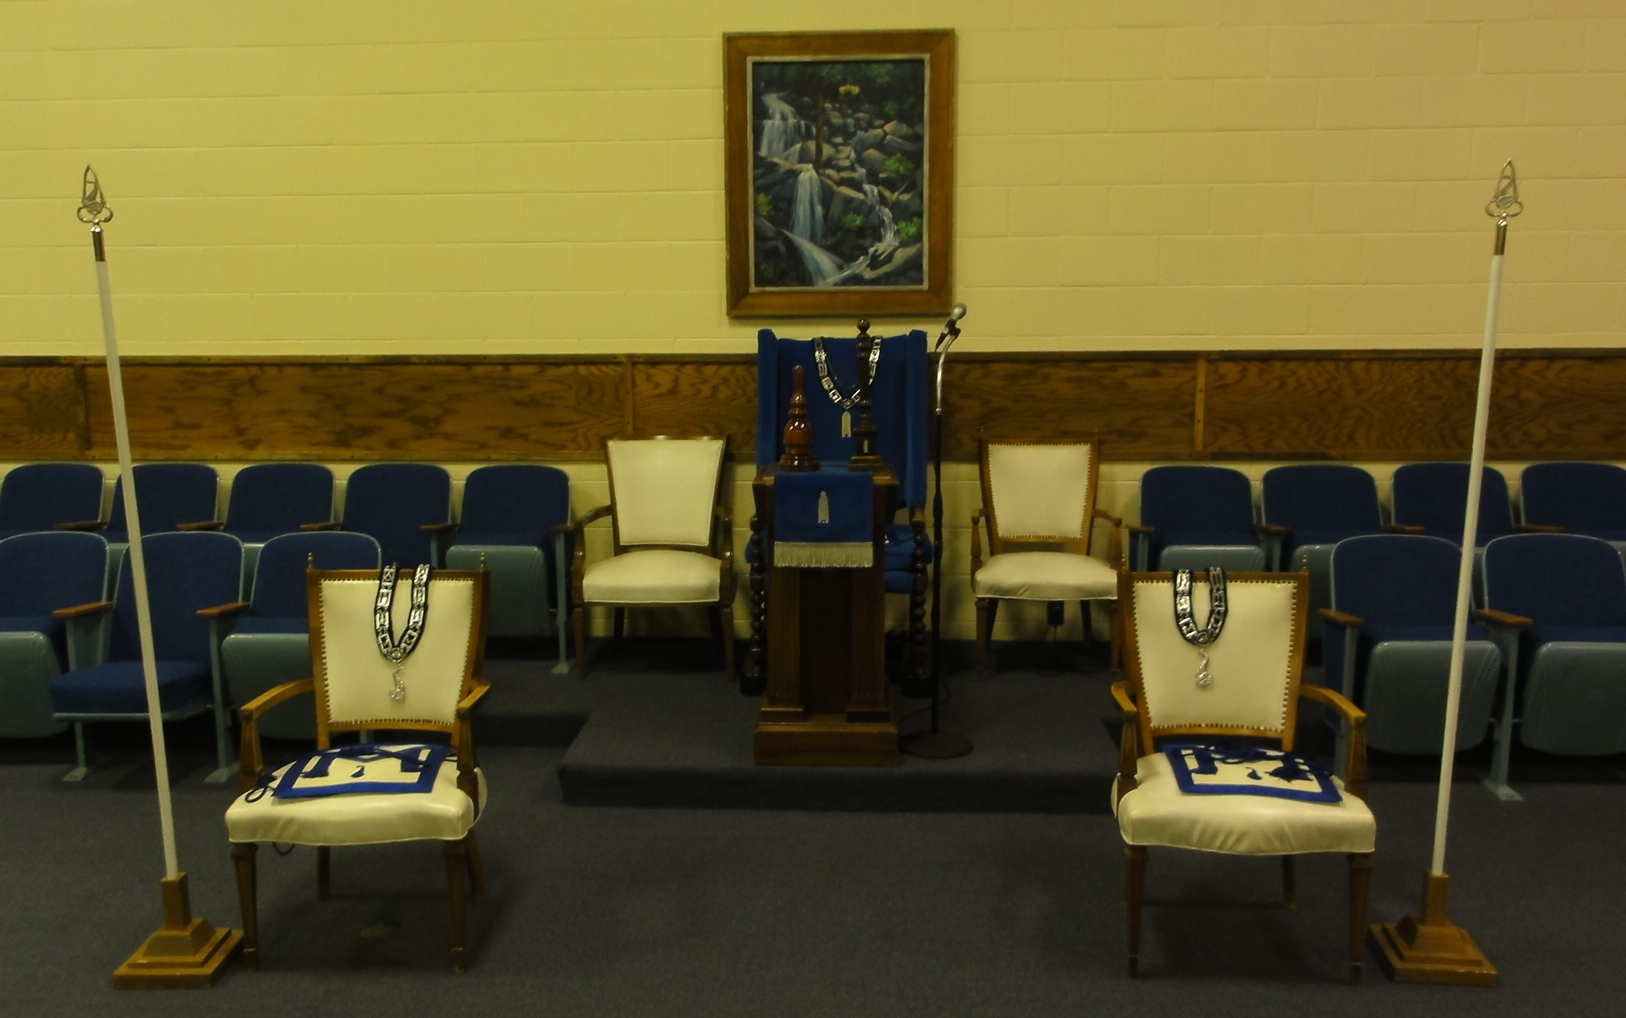 The chairs in the South, with jewels and aprons waiting.